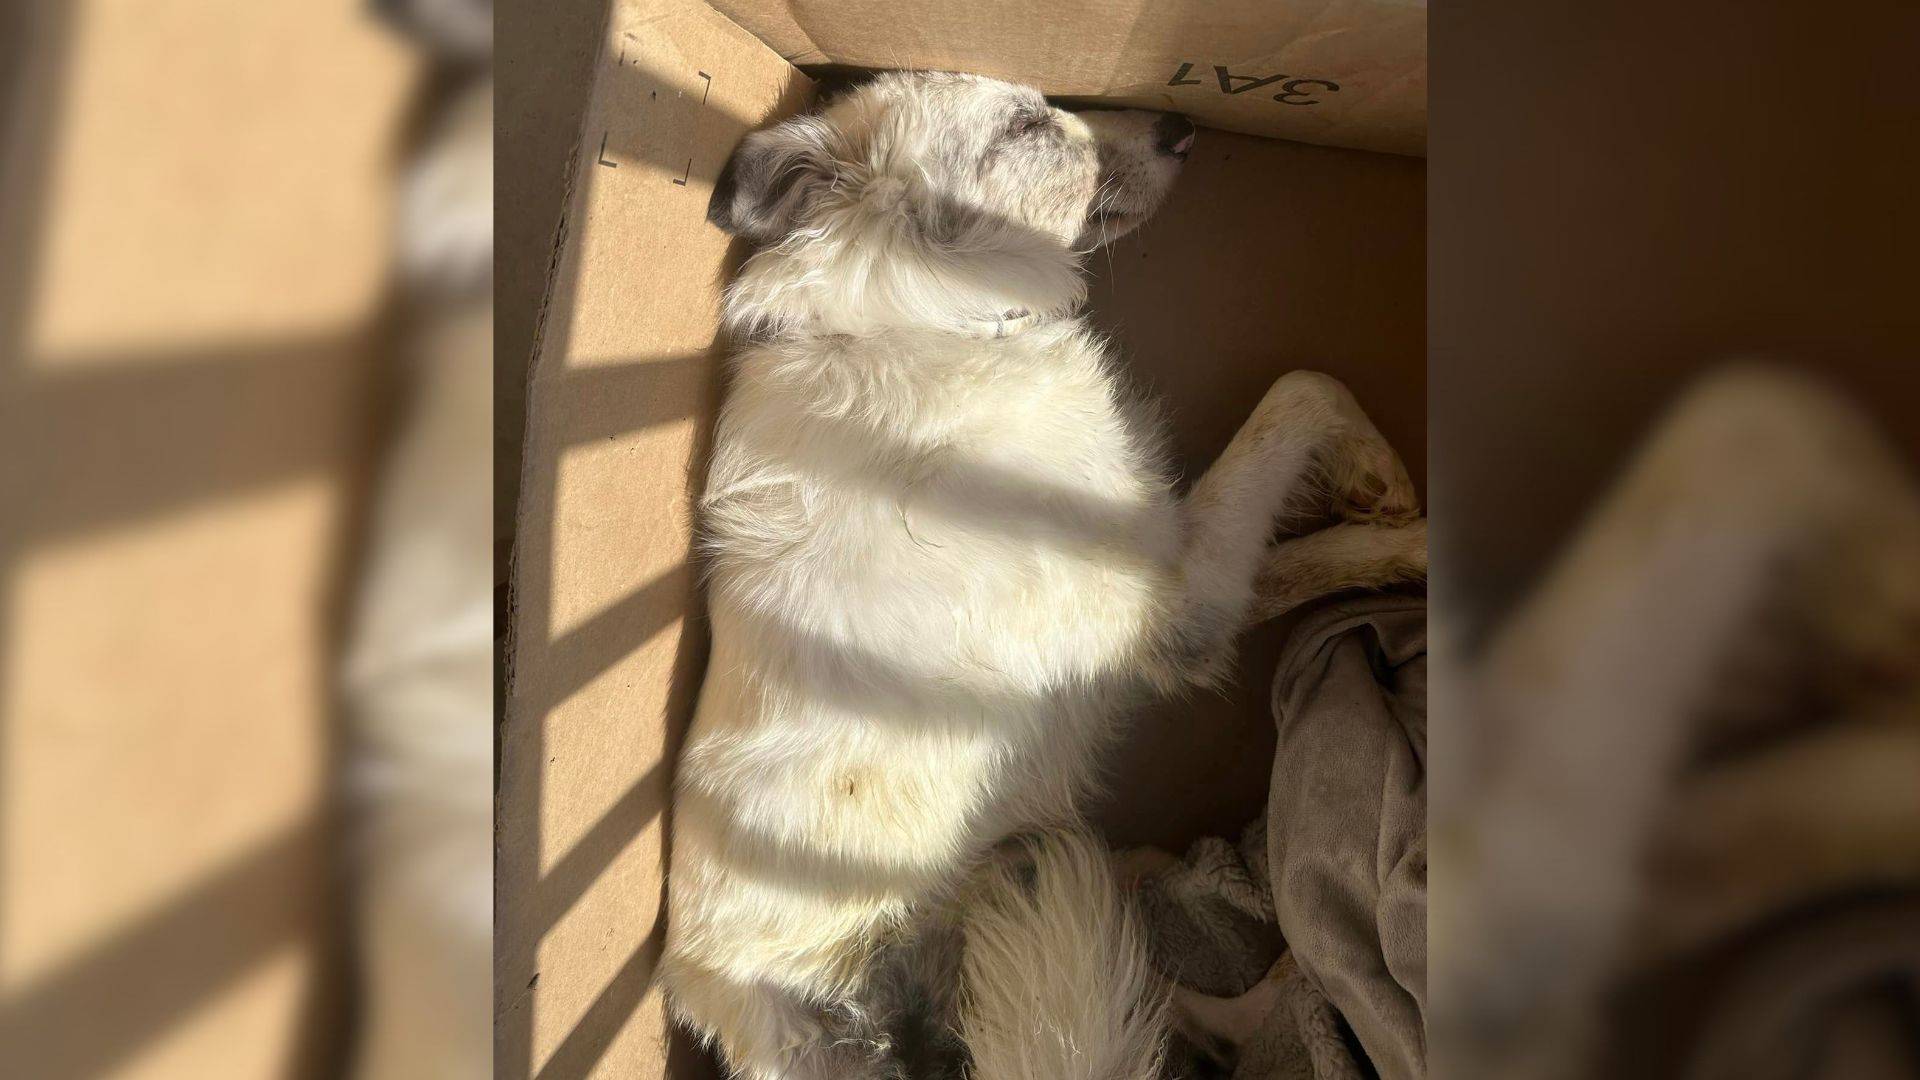 Woman Is Shocked When She Receives A Package With A Lifeless Dog Inside And Rushes To Help